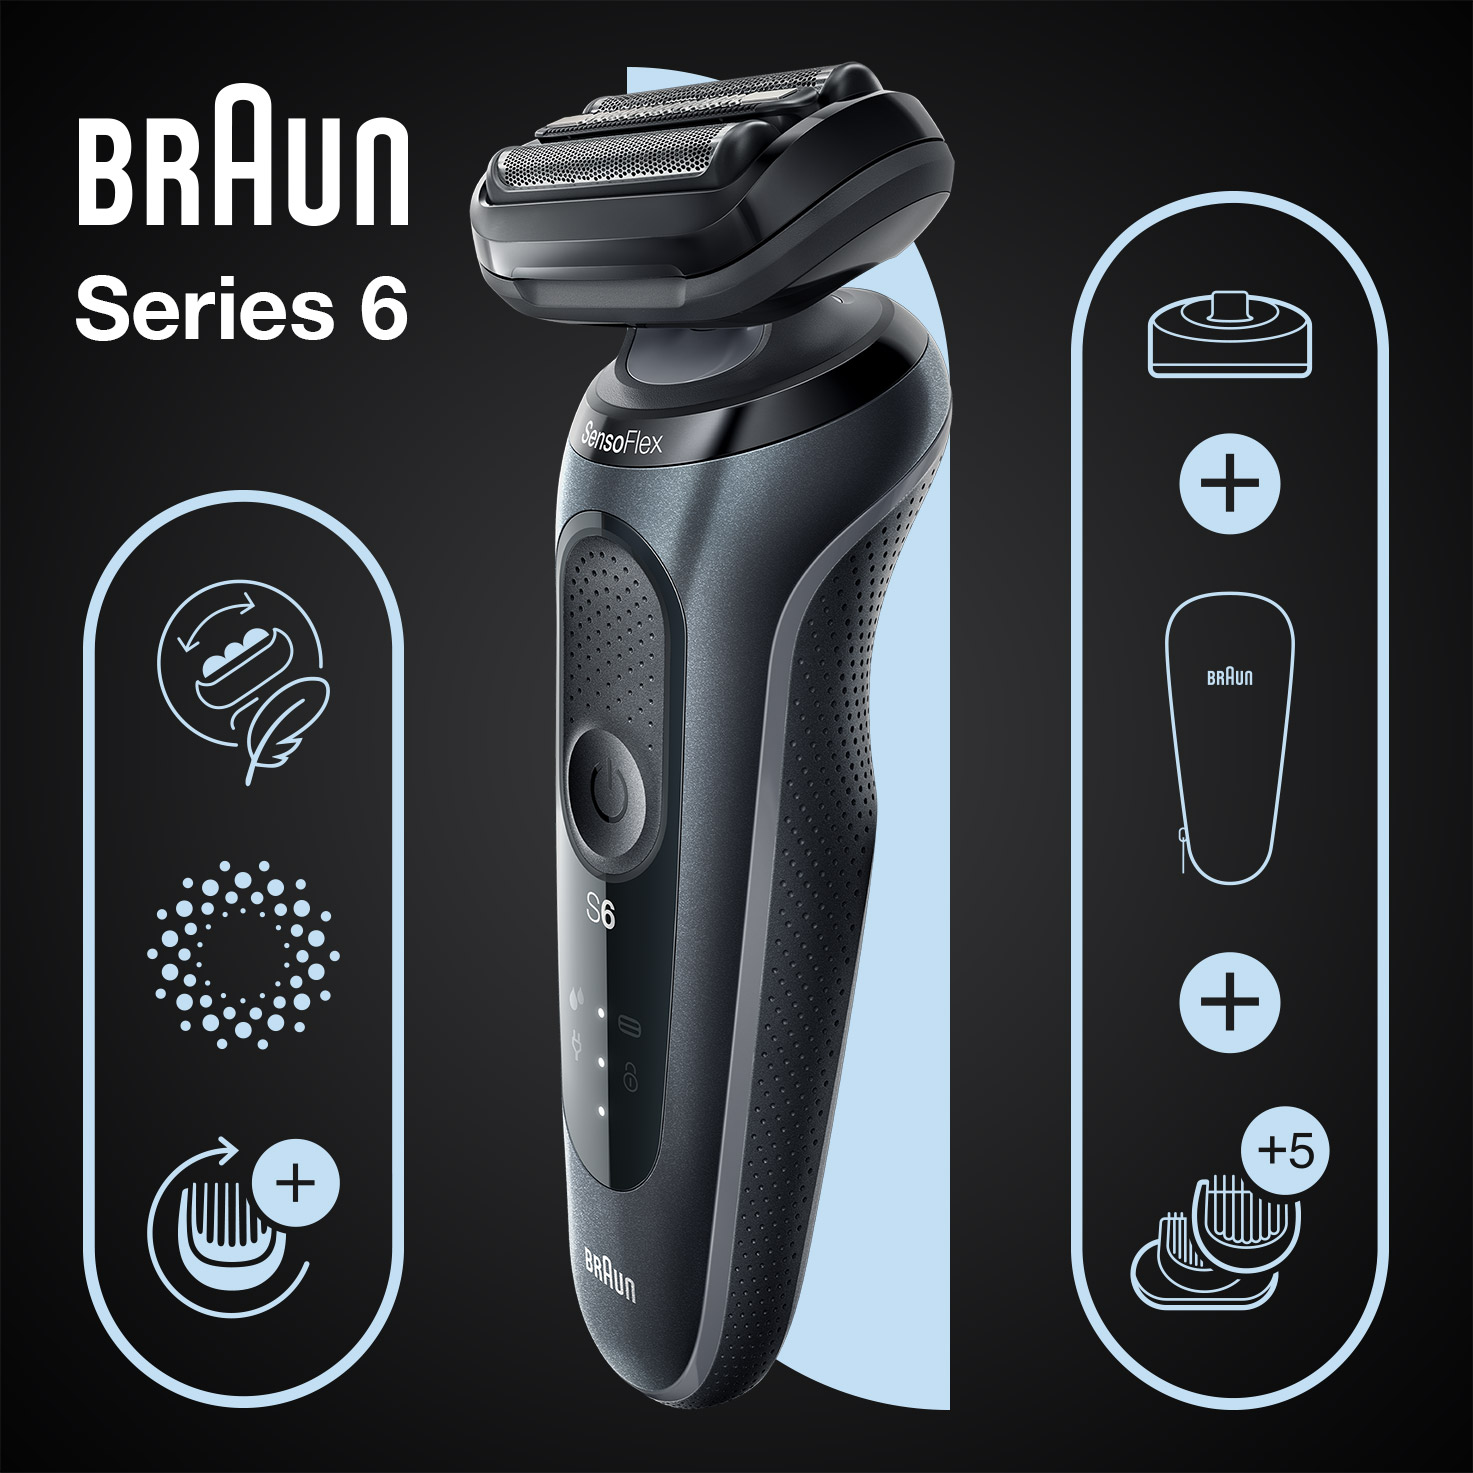 Series 6 61-N4500cs Wet & shaver grey. with SG | and charging attachment, 1 stand Dry Braun